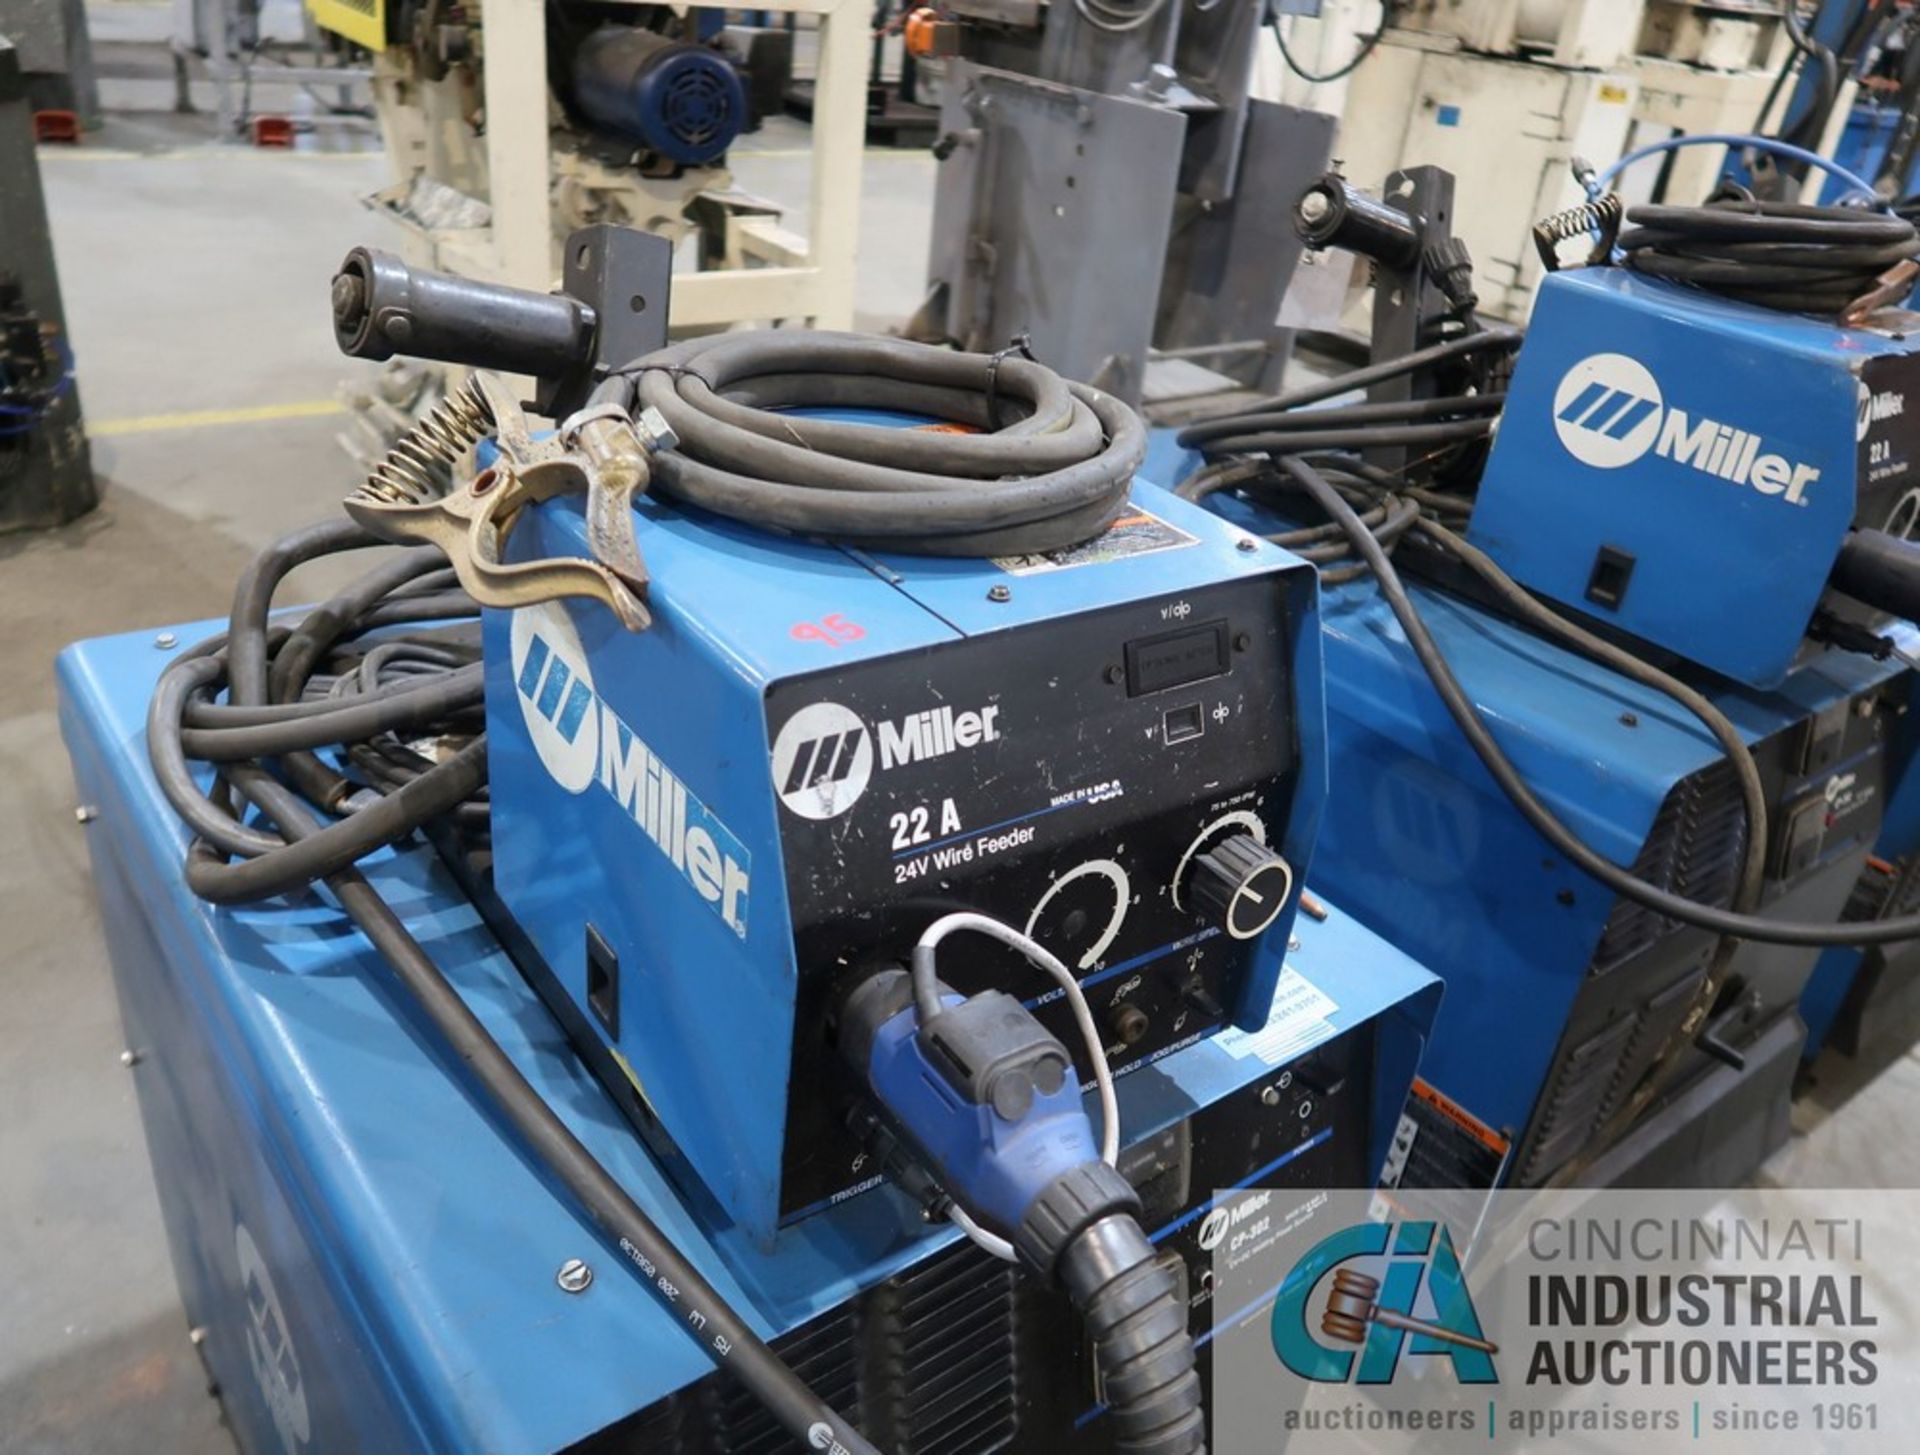 300 AMP MILLER CP-302 CV-DC WELDING POWER SOURCE; S/N LB330866, WITH MILLER 22A 24 VOLT WIRE FEEDER - Image 4 of 5